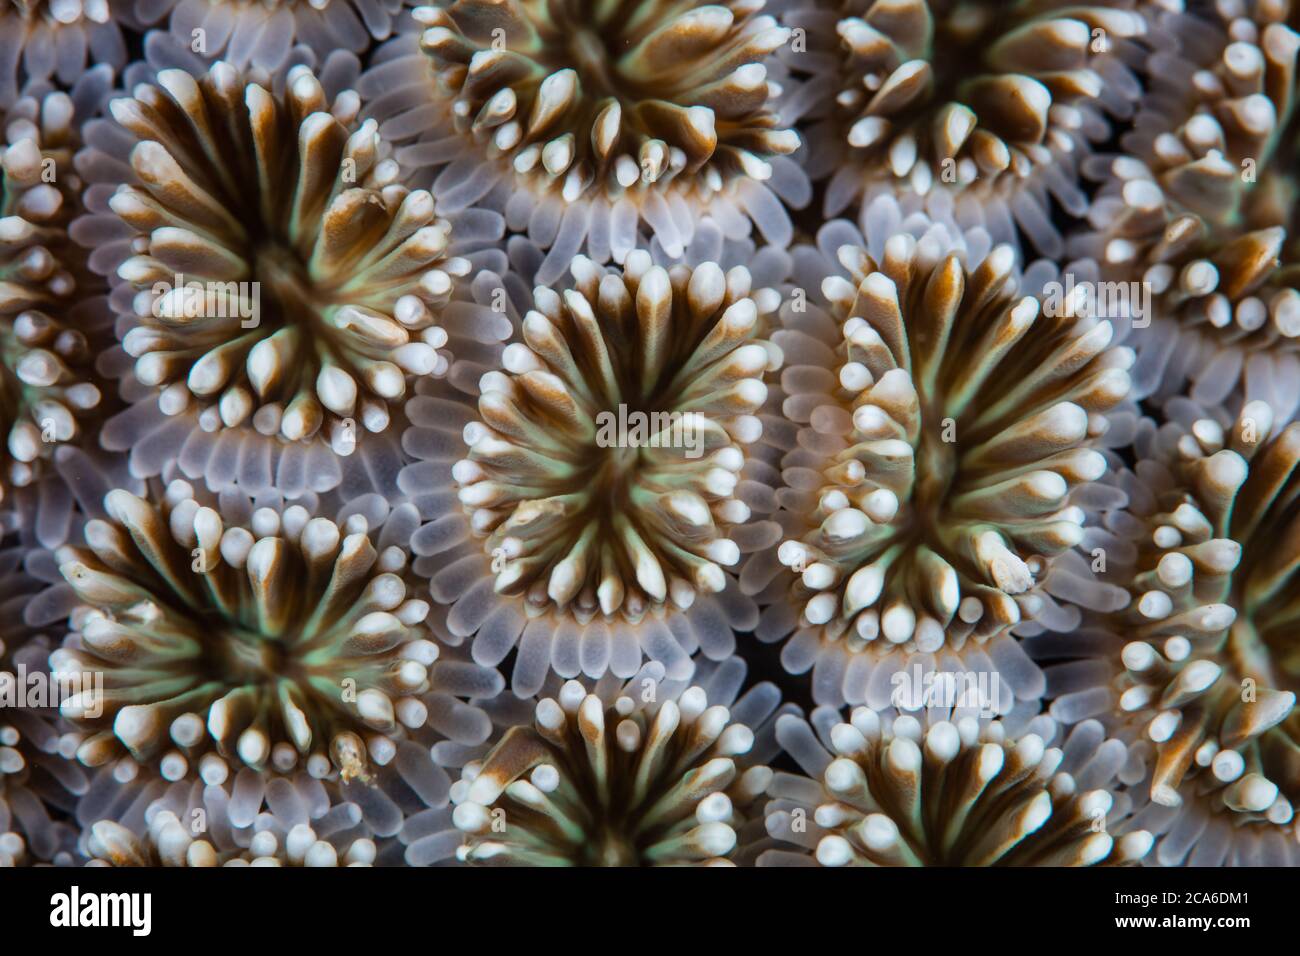 Detail of a star coral, Galaxea sp., growing on a coral reef in Indonesia. This part of the world harbors extraordinary marine biodiversity. Stock Photo